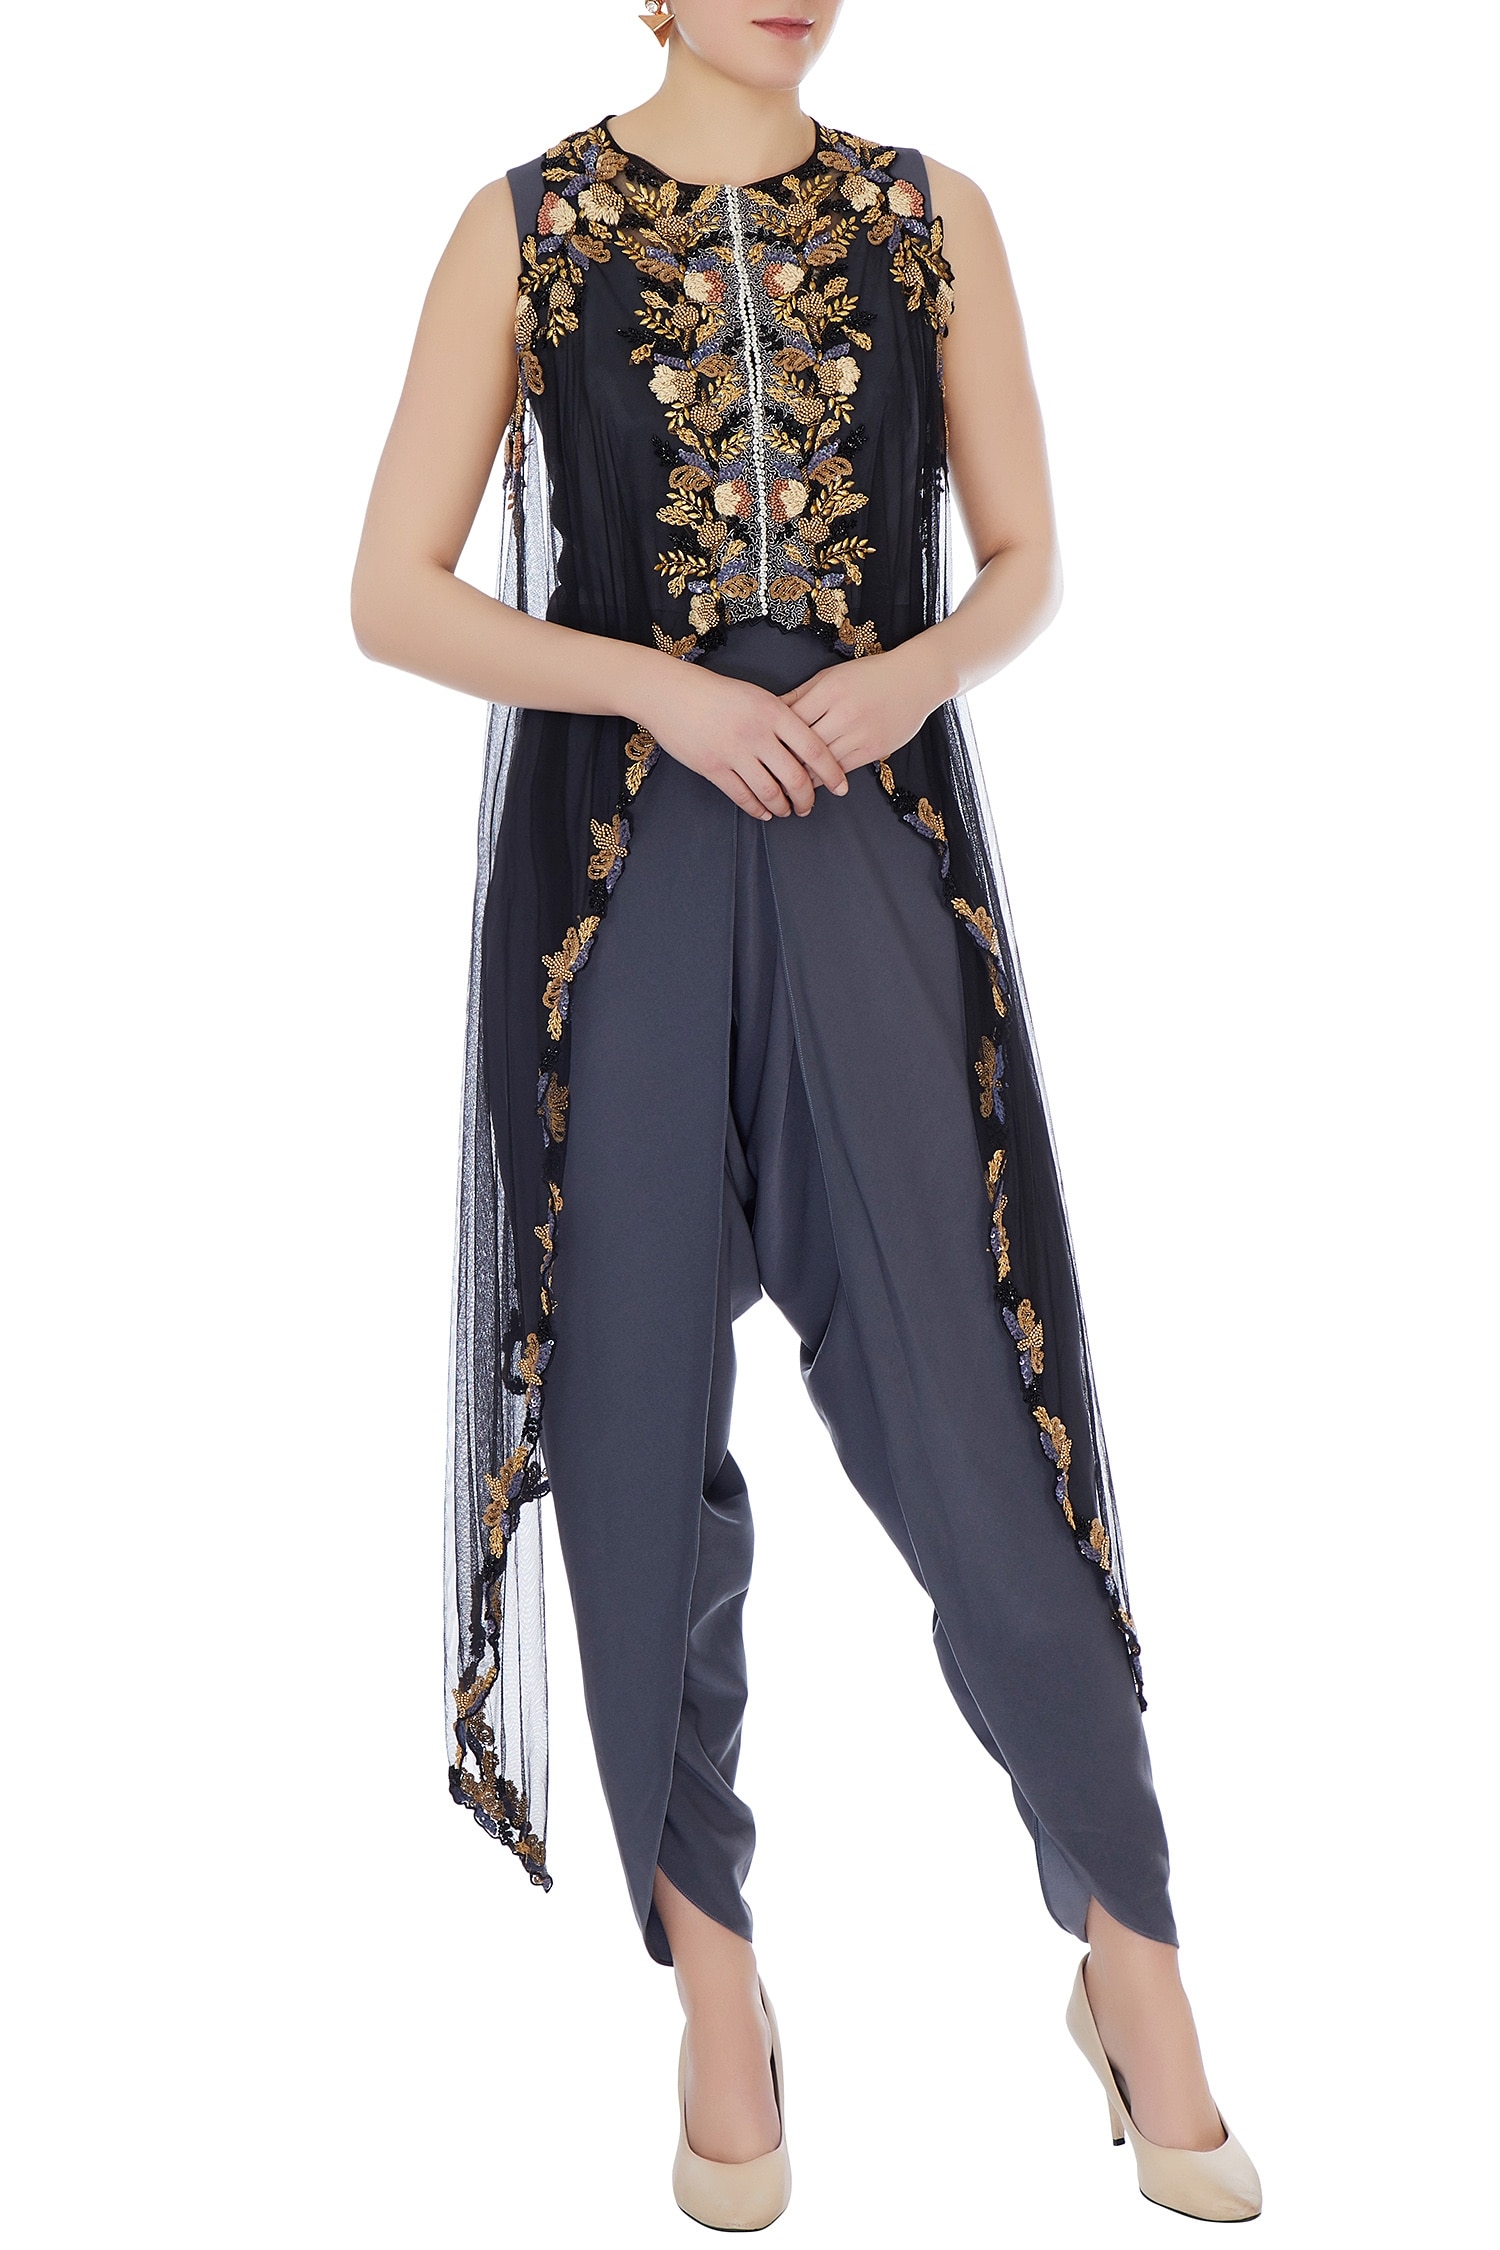 Buy Ayesha Aejaz Grey Jumpsuit With Embroidered Cape Online | Aza Fashions